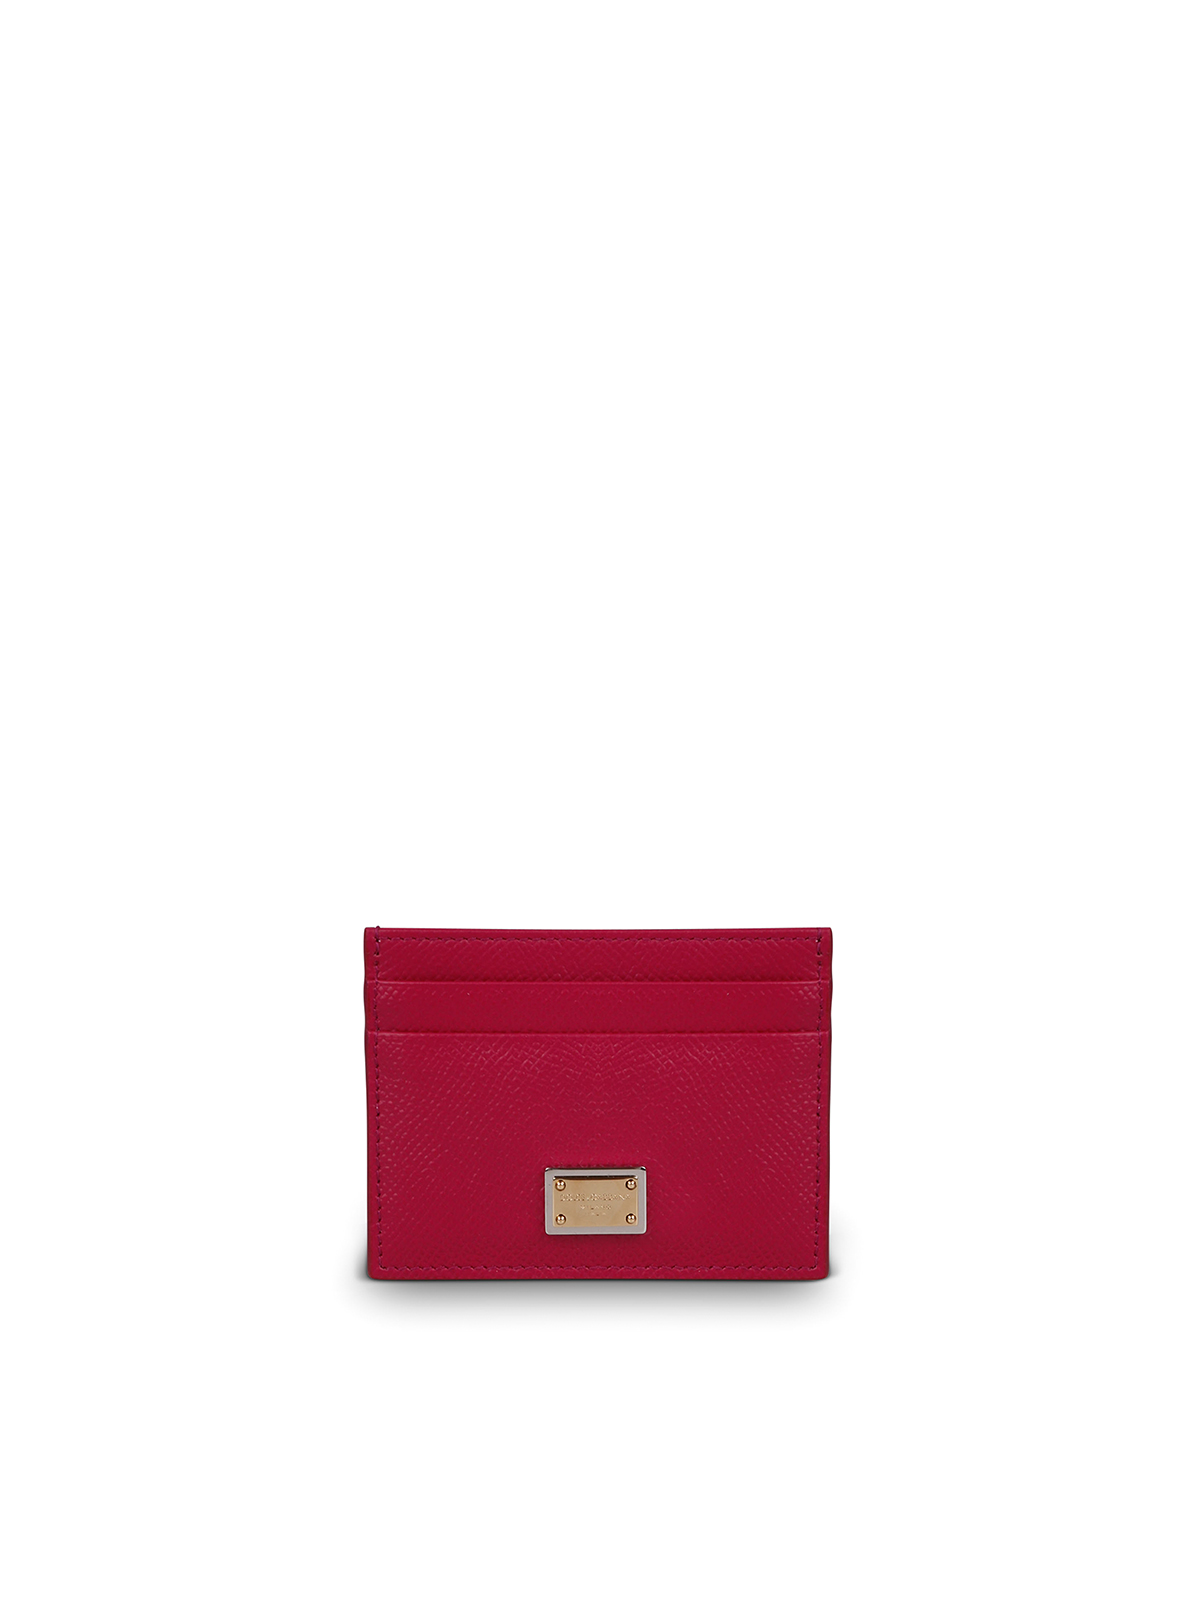 Dolce & Gabbana Small Leather Goods Credit Card Holder In Pink